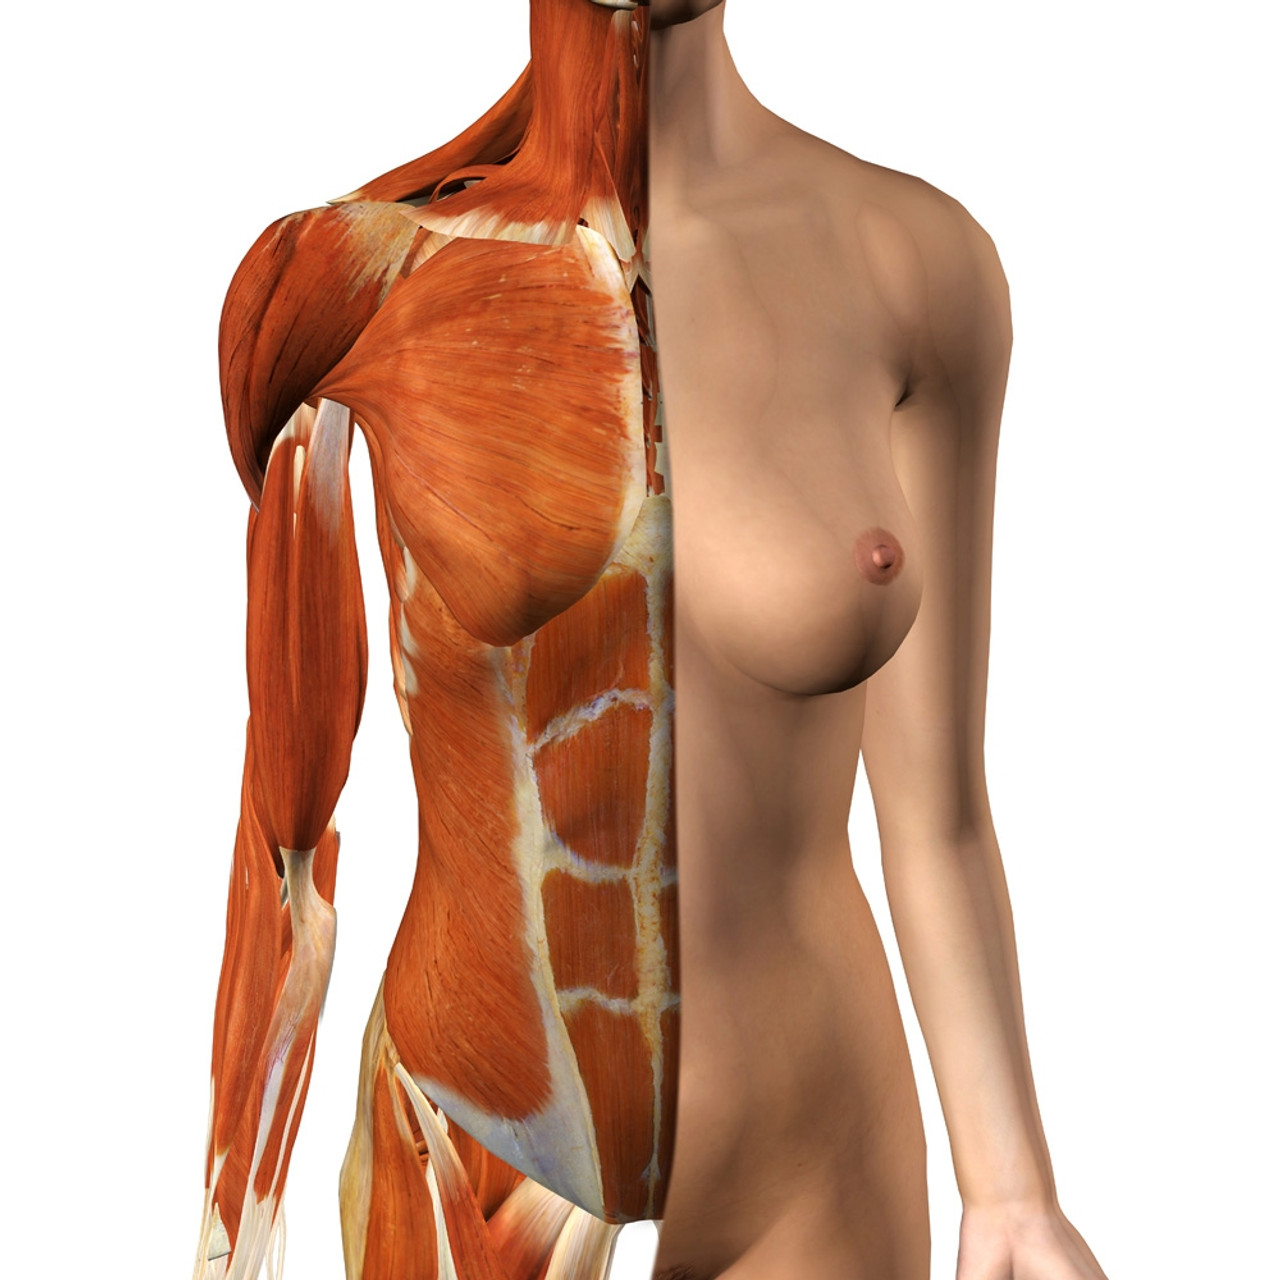 Female anterior thoracic wall chest muscles. Poster Print by Hank  Grebe/Stocktrek Images - Item # VARPSTHAG700033H